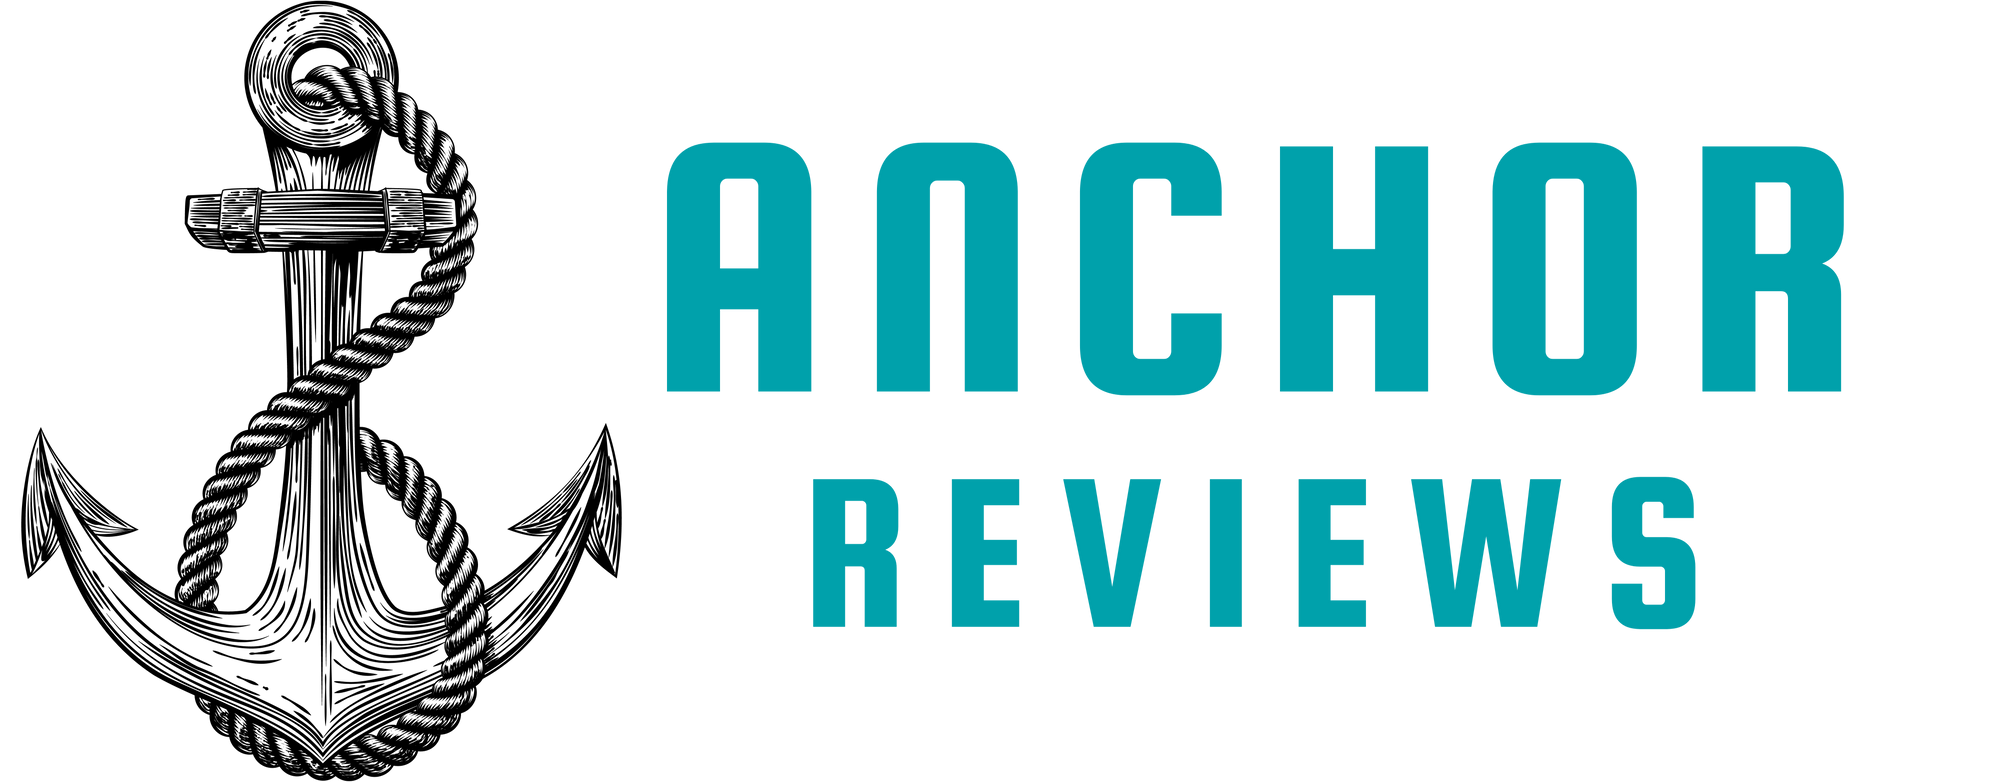 AnchorReviews  home